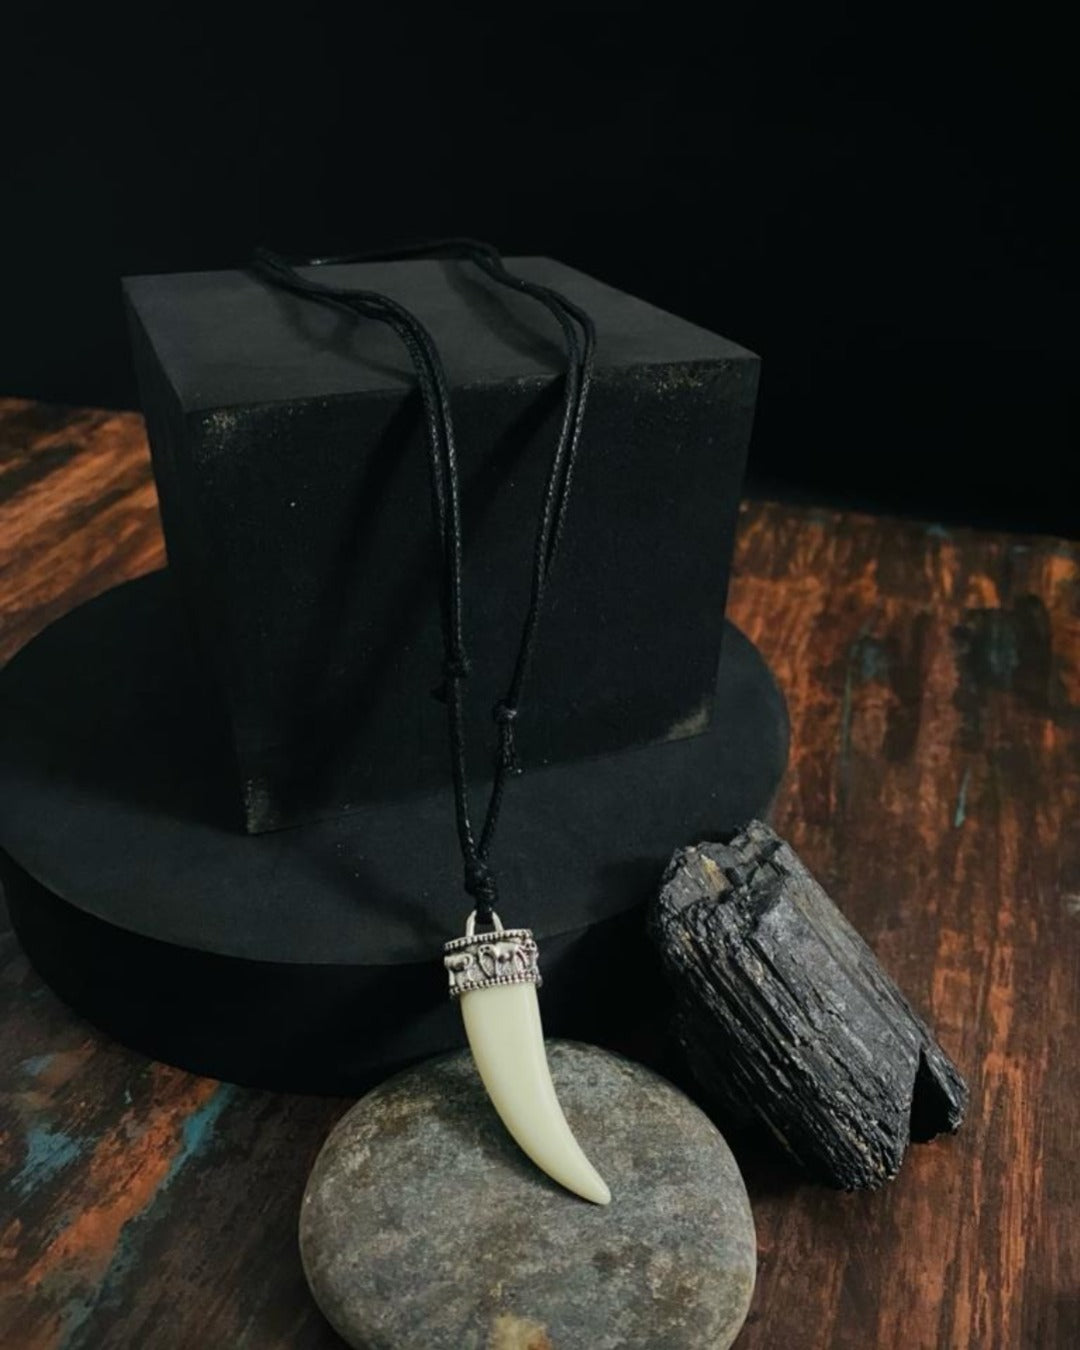 The Men Thing Necklace For Men - Faux Ivory Tusk Pendant Antique Silver Crown With Black Cotton Cord